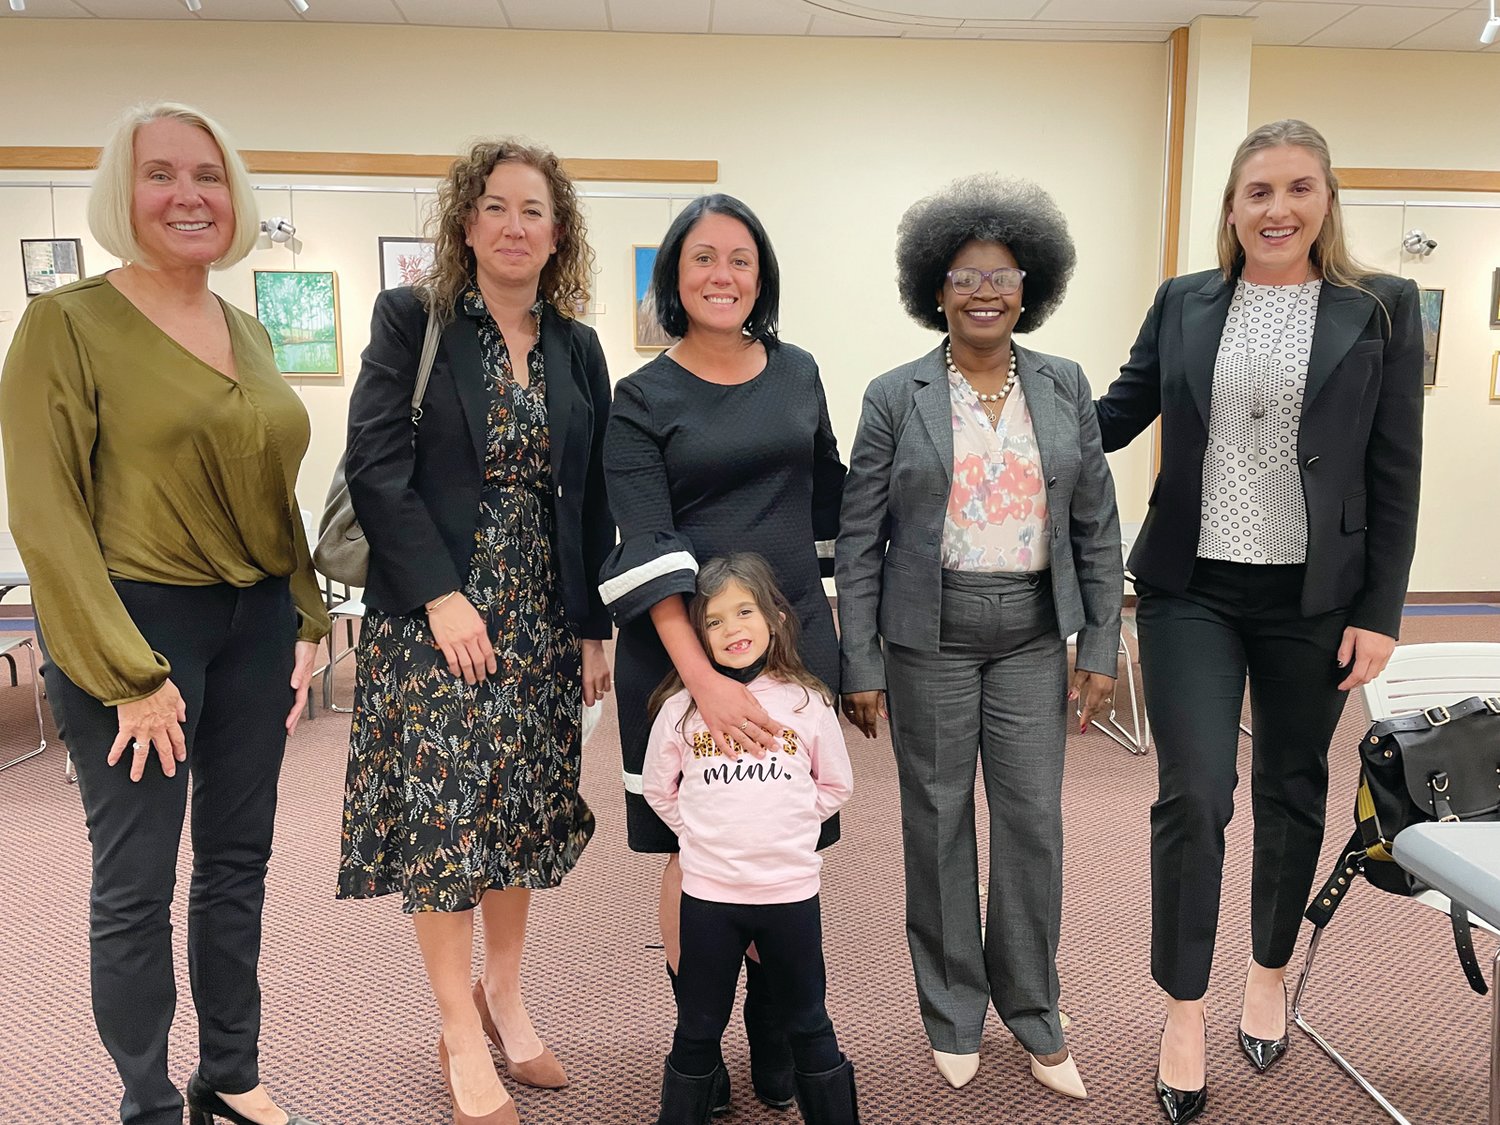 LEADING LADIES: Sen. Hanna Gallo, Councilwoman Jessica Marino, Councilwoman Nicole Renzulli
and her daughter, Councilwoman Aniece Germain and Rep. Jacquelyn Baginski pose for a photo last
week at Cranston Central.